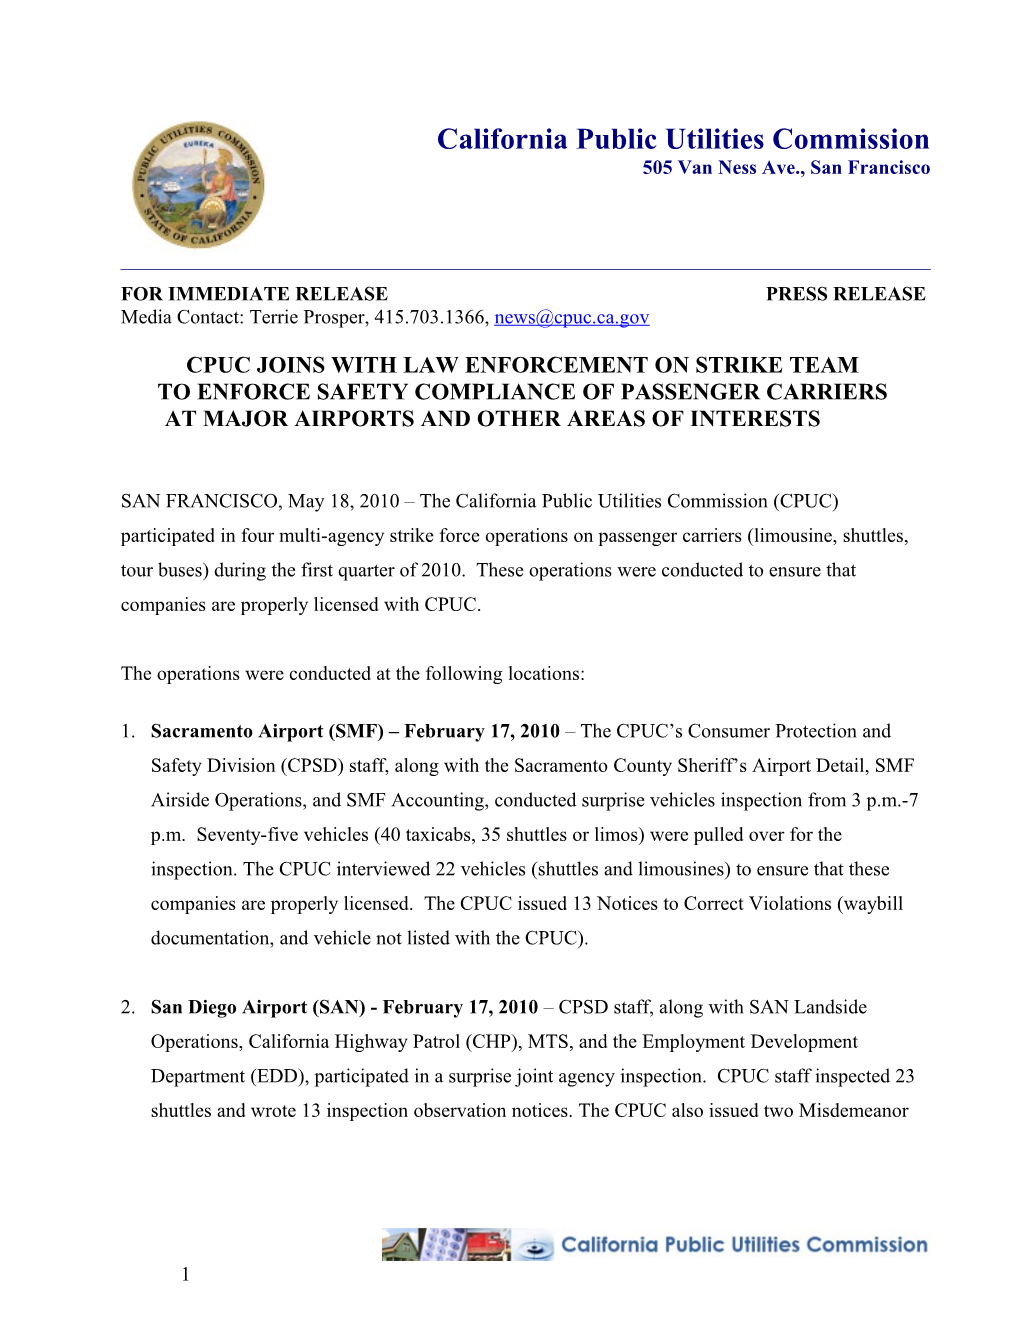 Cpuc Joins with Law Enforcement on Strike Team